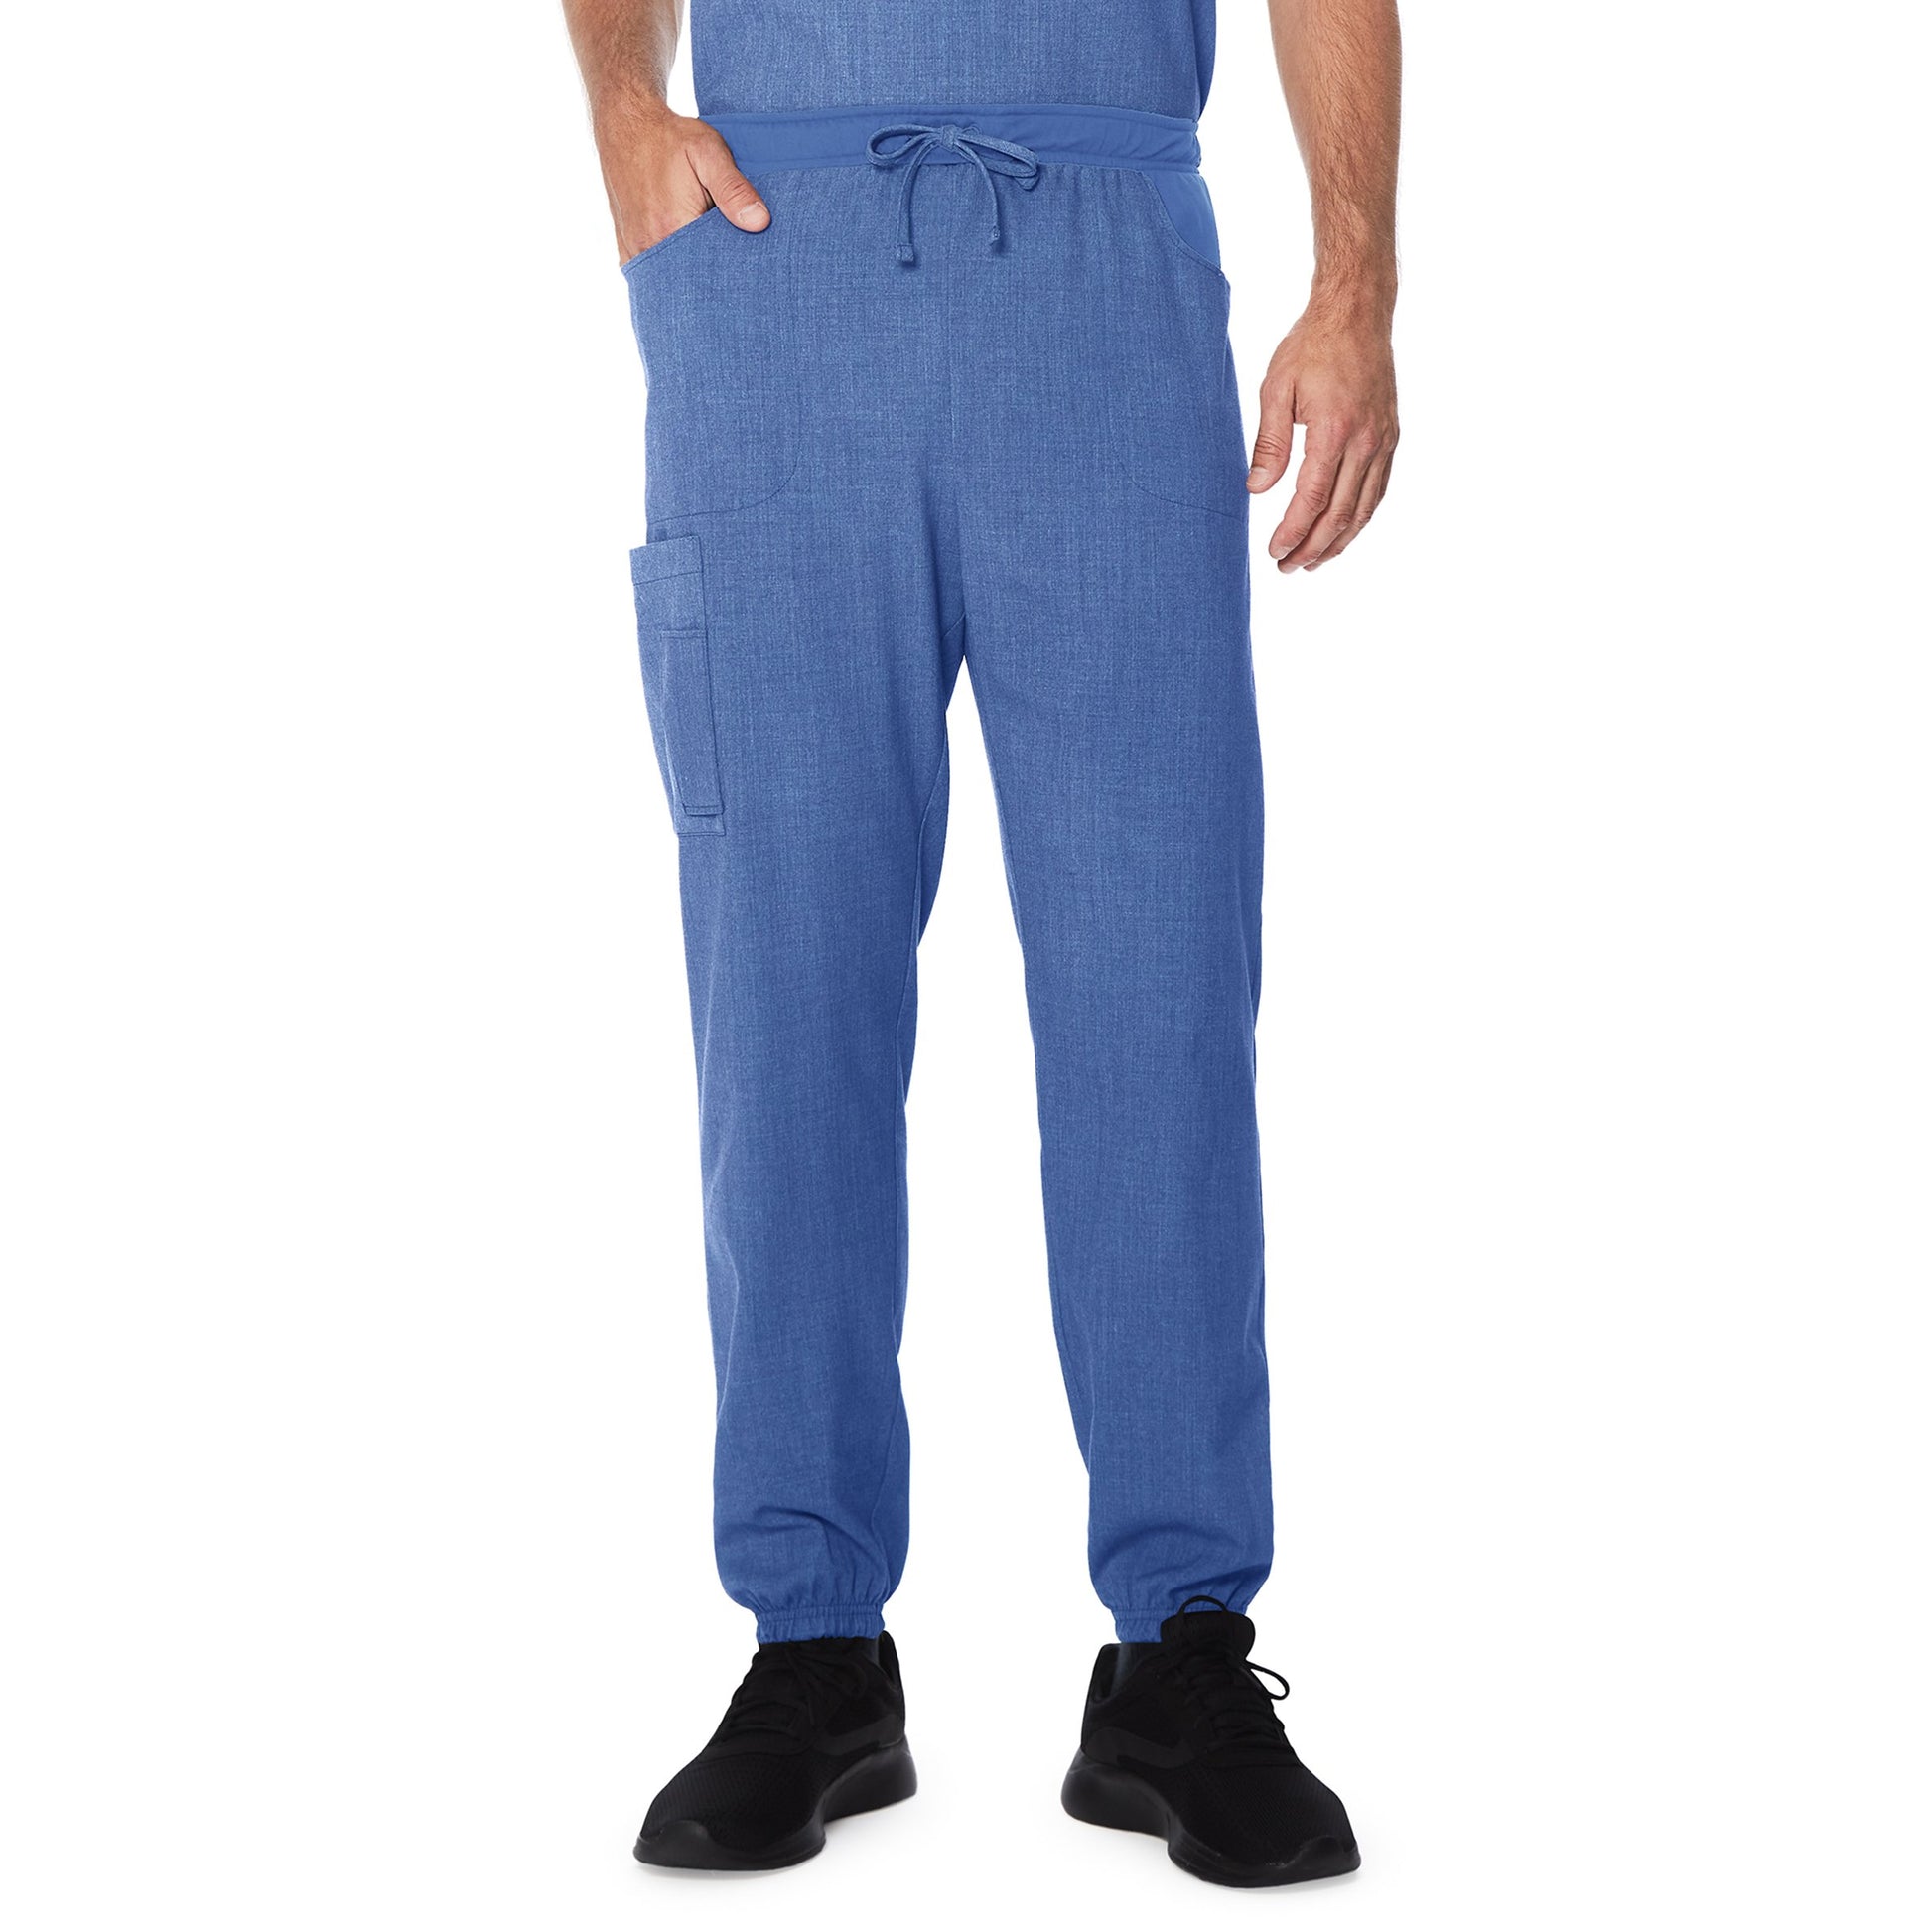 Ceil Heather;Model is wearing size M. He is 6'2", Waist 32", Inseam 32".@A man wearing a ceil heather scrub jogger pant.